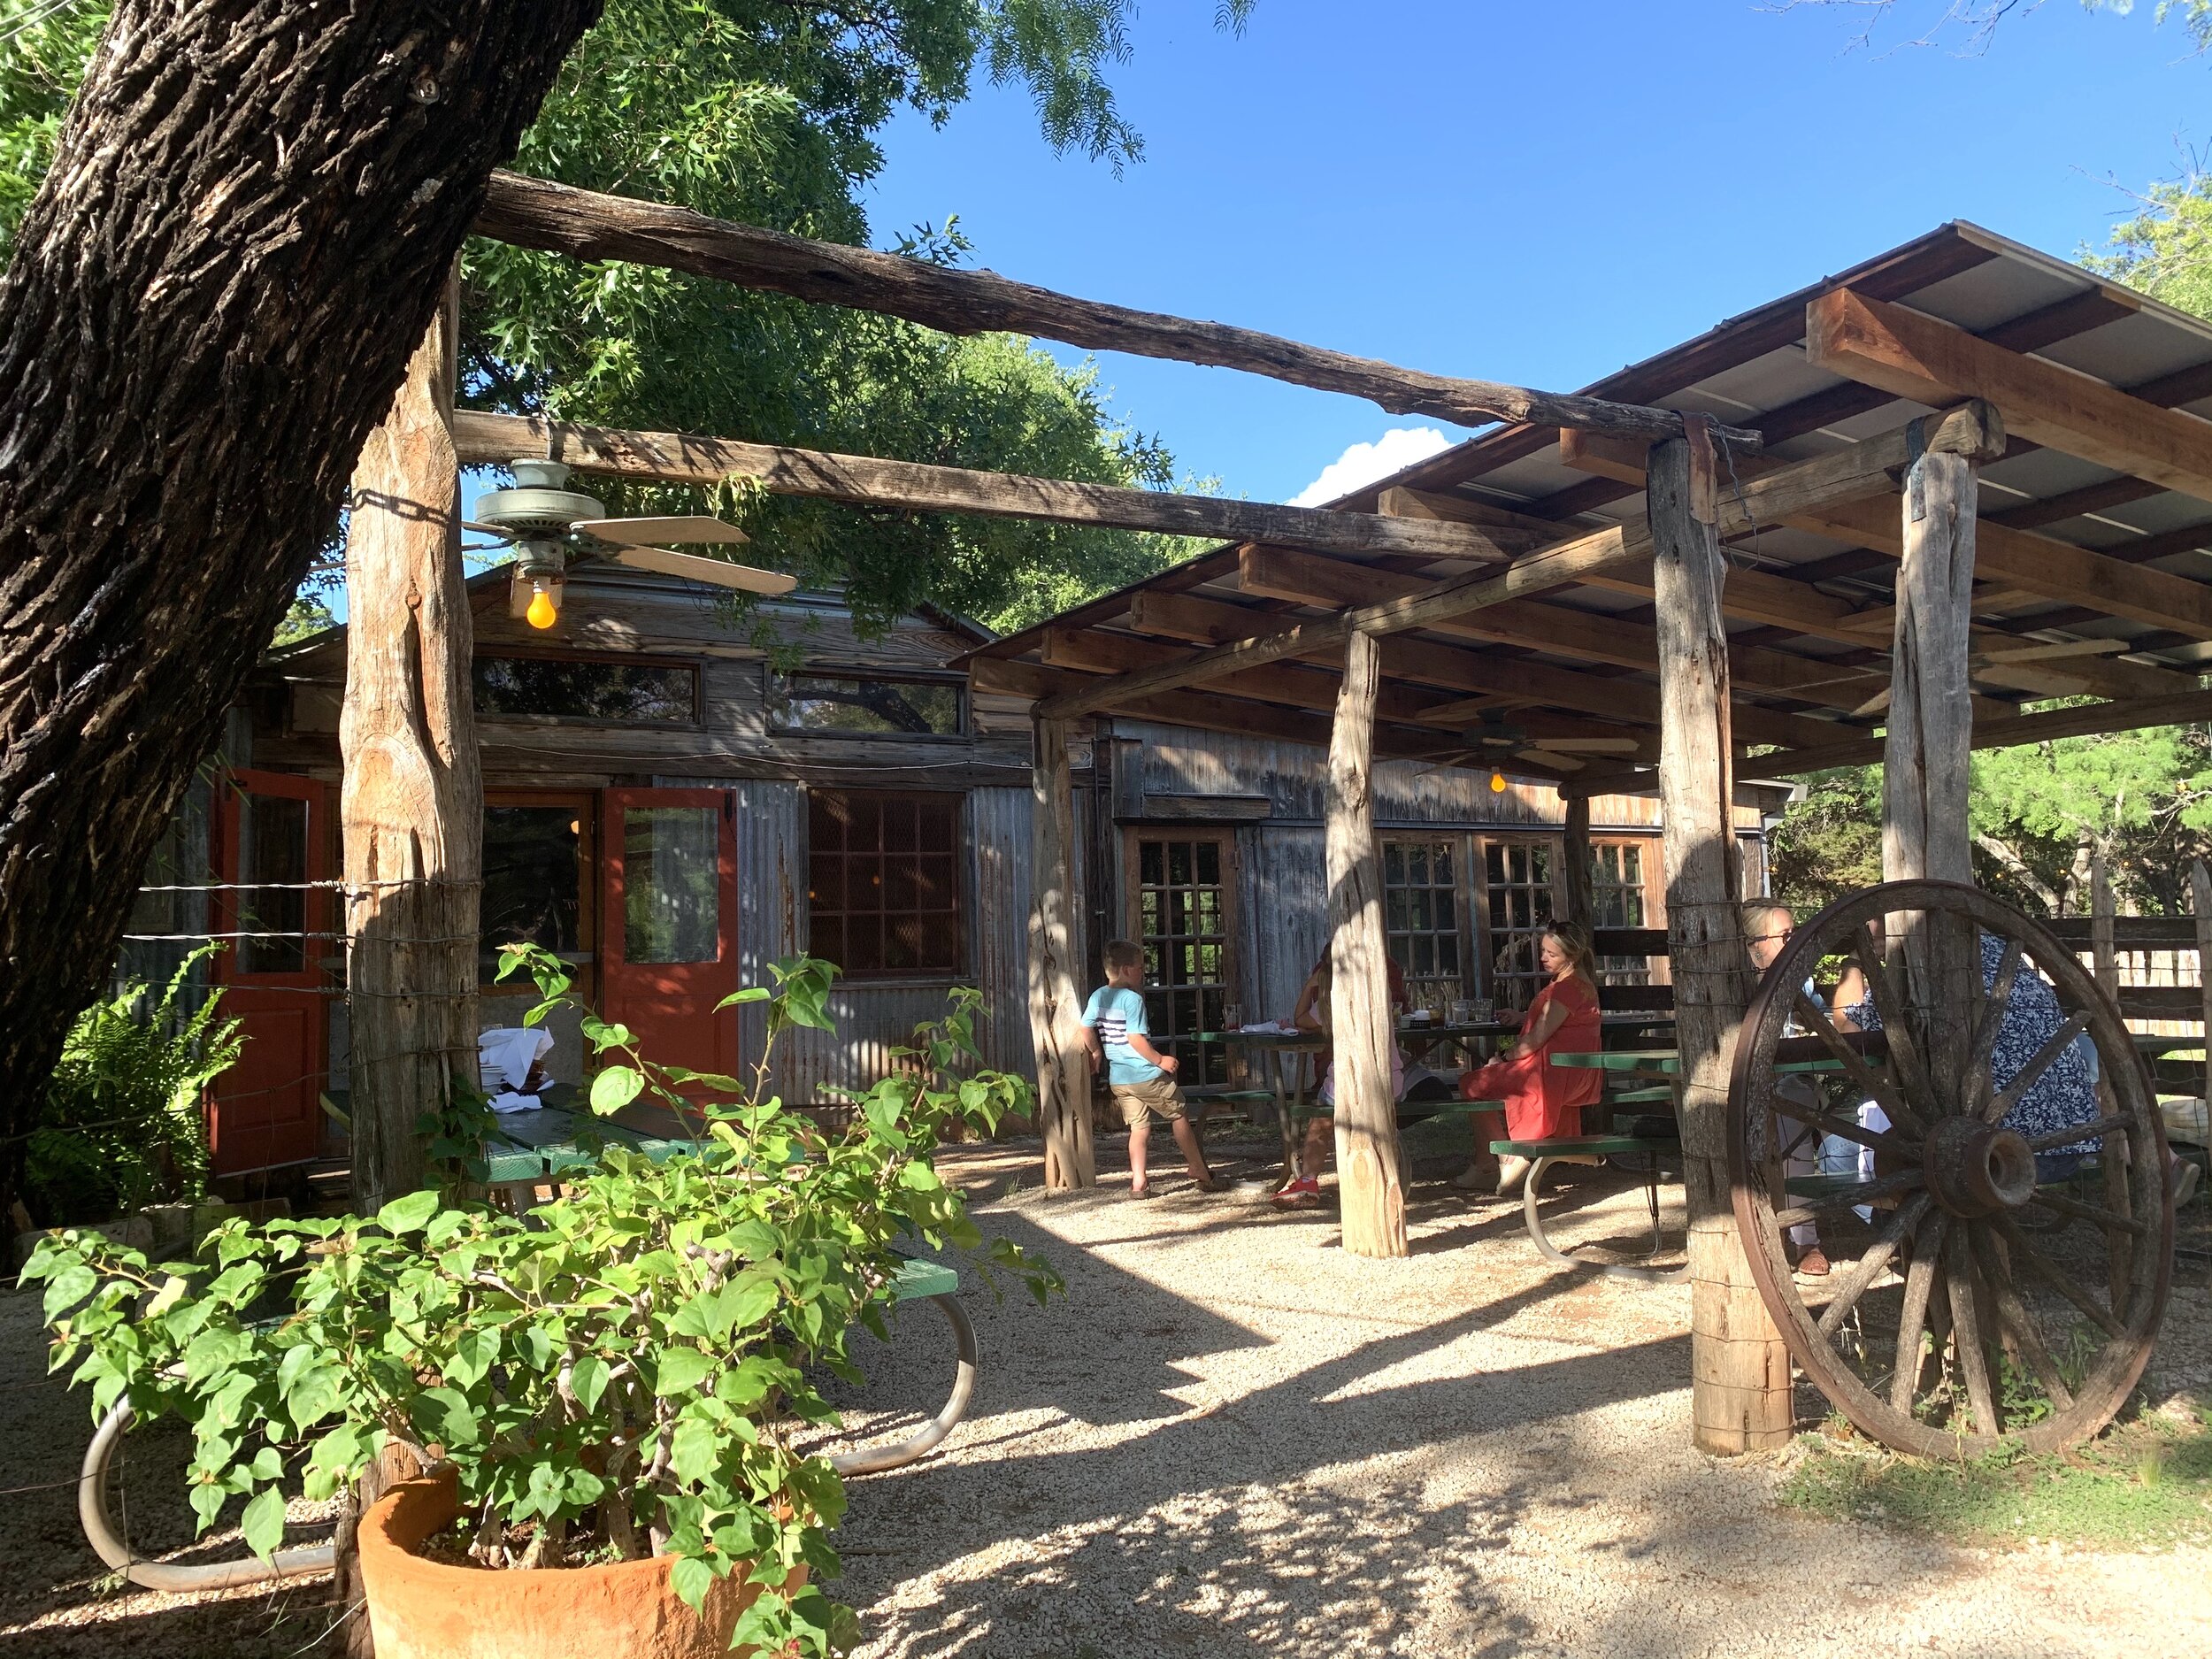  Nothing is better than an unexpected, wonderful experience. One evening we planned to venture to a local BBQ joint on the outskirts of Abilene, Texas. Along the way, we found   Perini Ranch   restaurant in Buffalo Gap, Texas. It was in the middle of